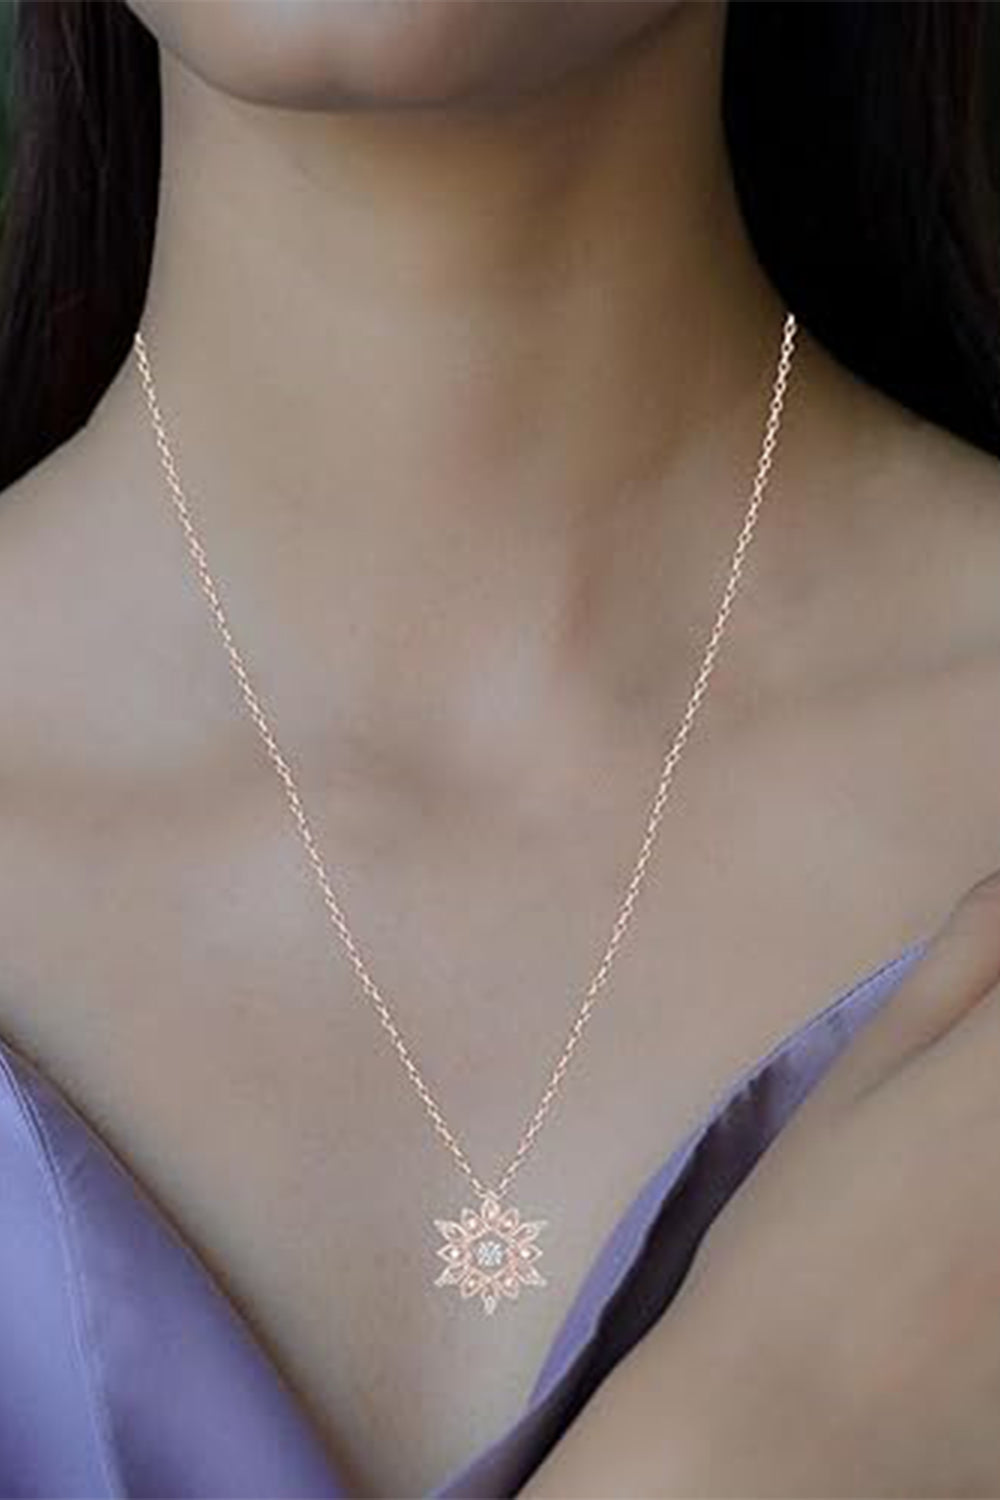 Rose Gold Color Vintage-Style Snowflake Pendant Necklace for Women 